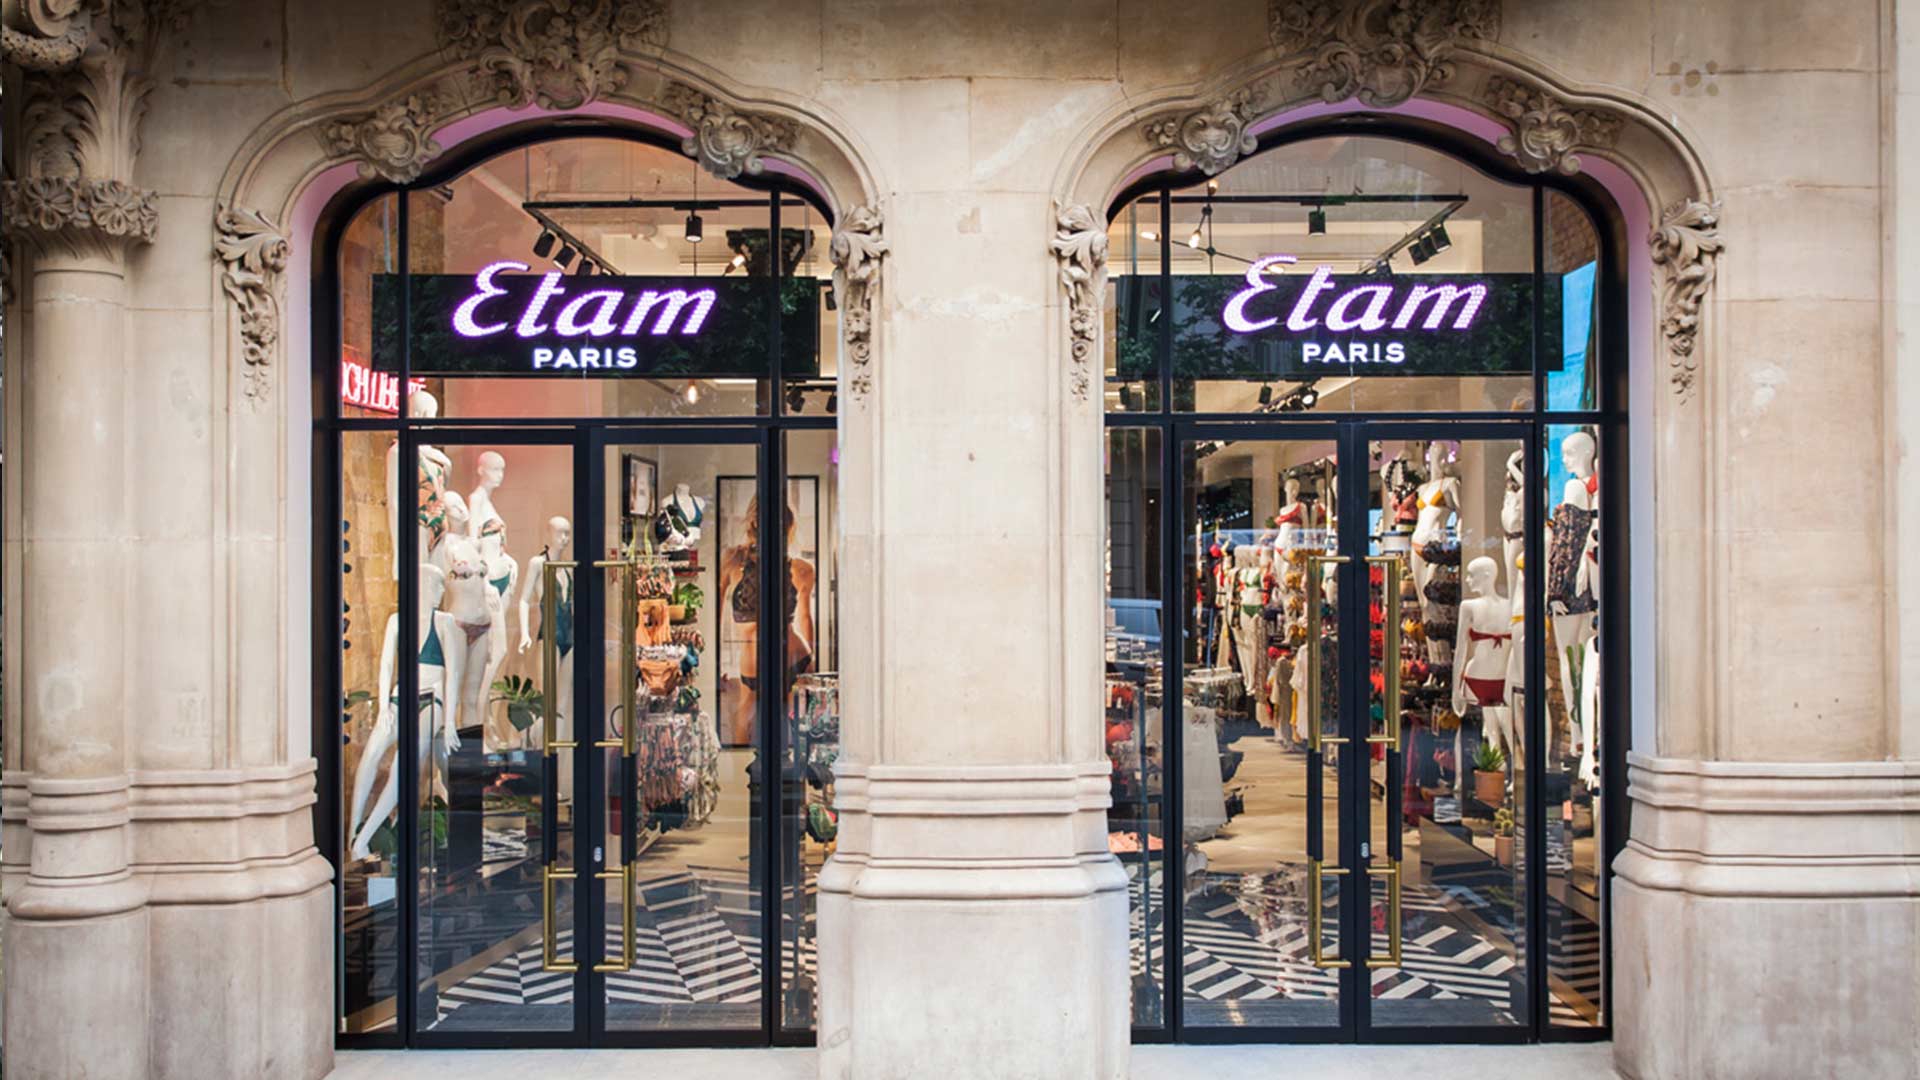 Implementation and build of Etam stores in Spain